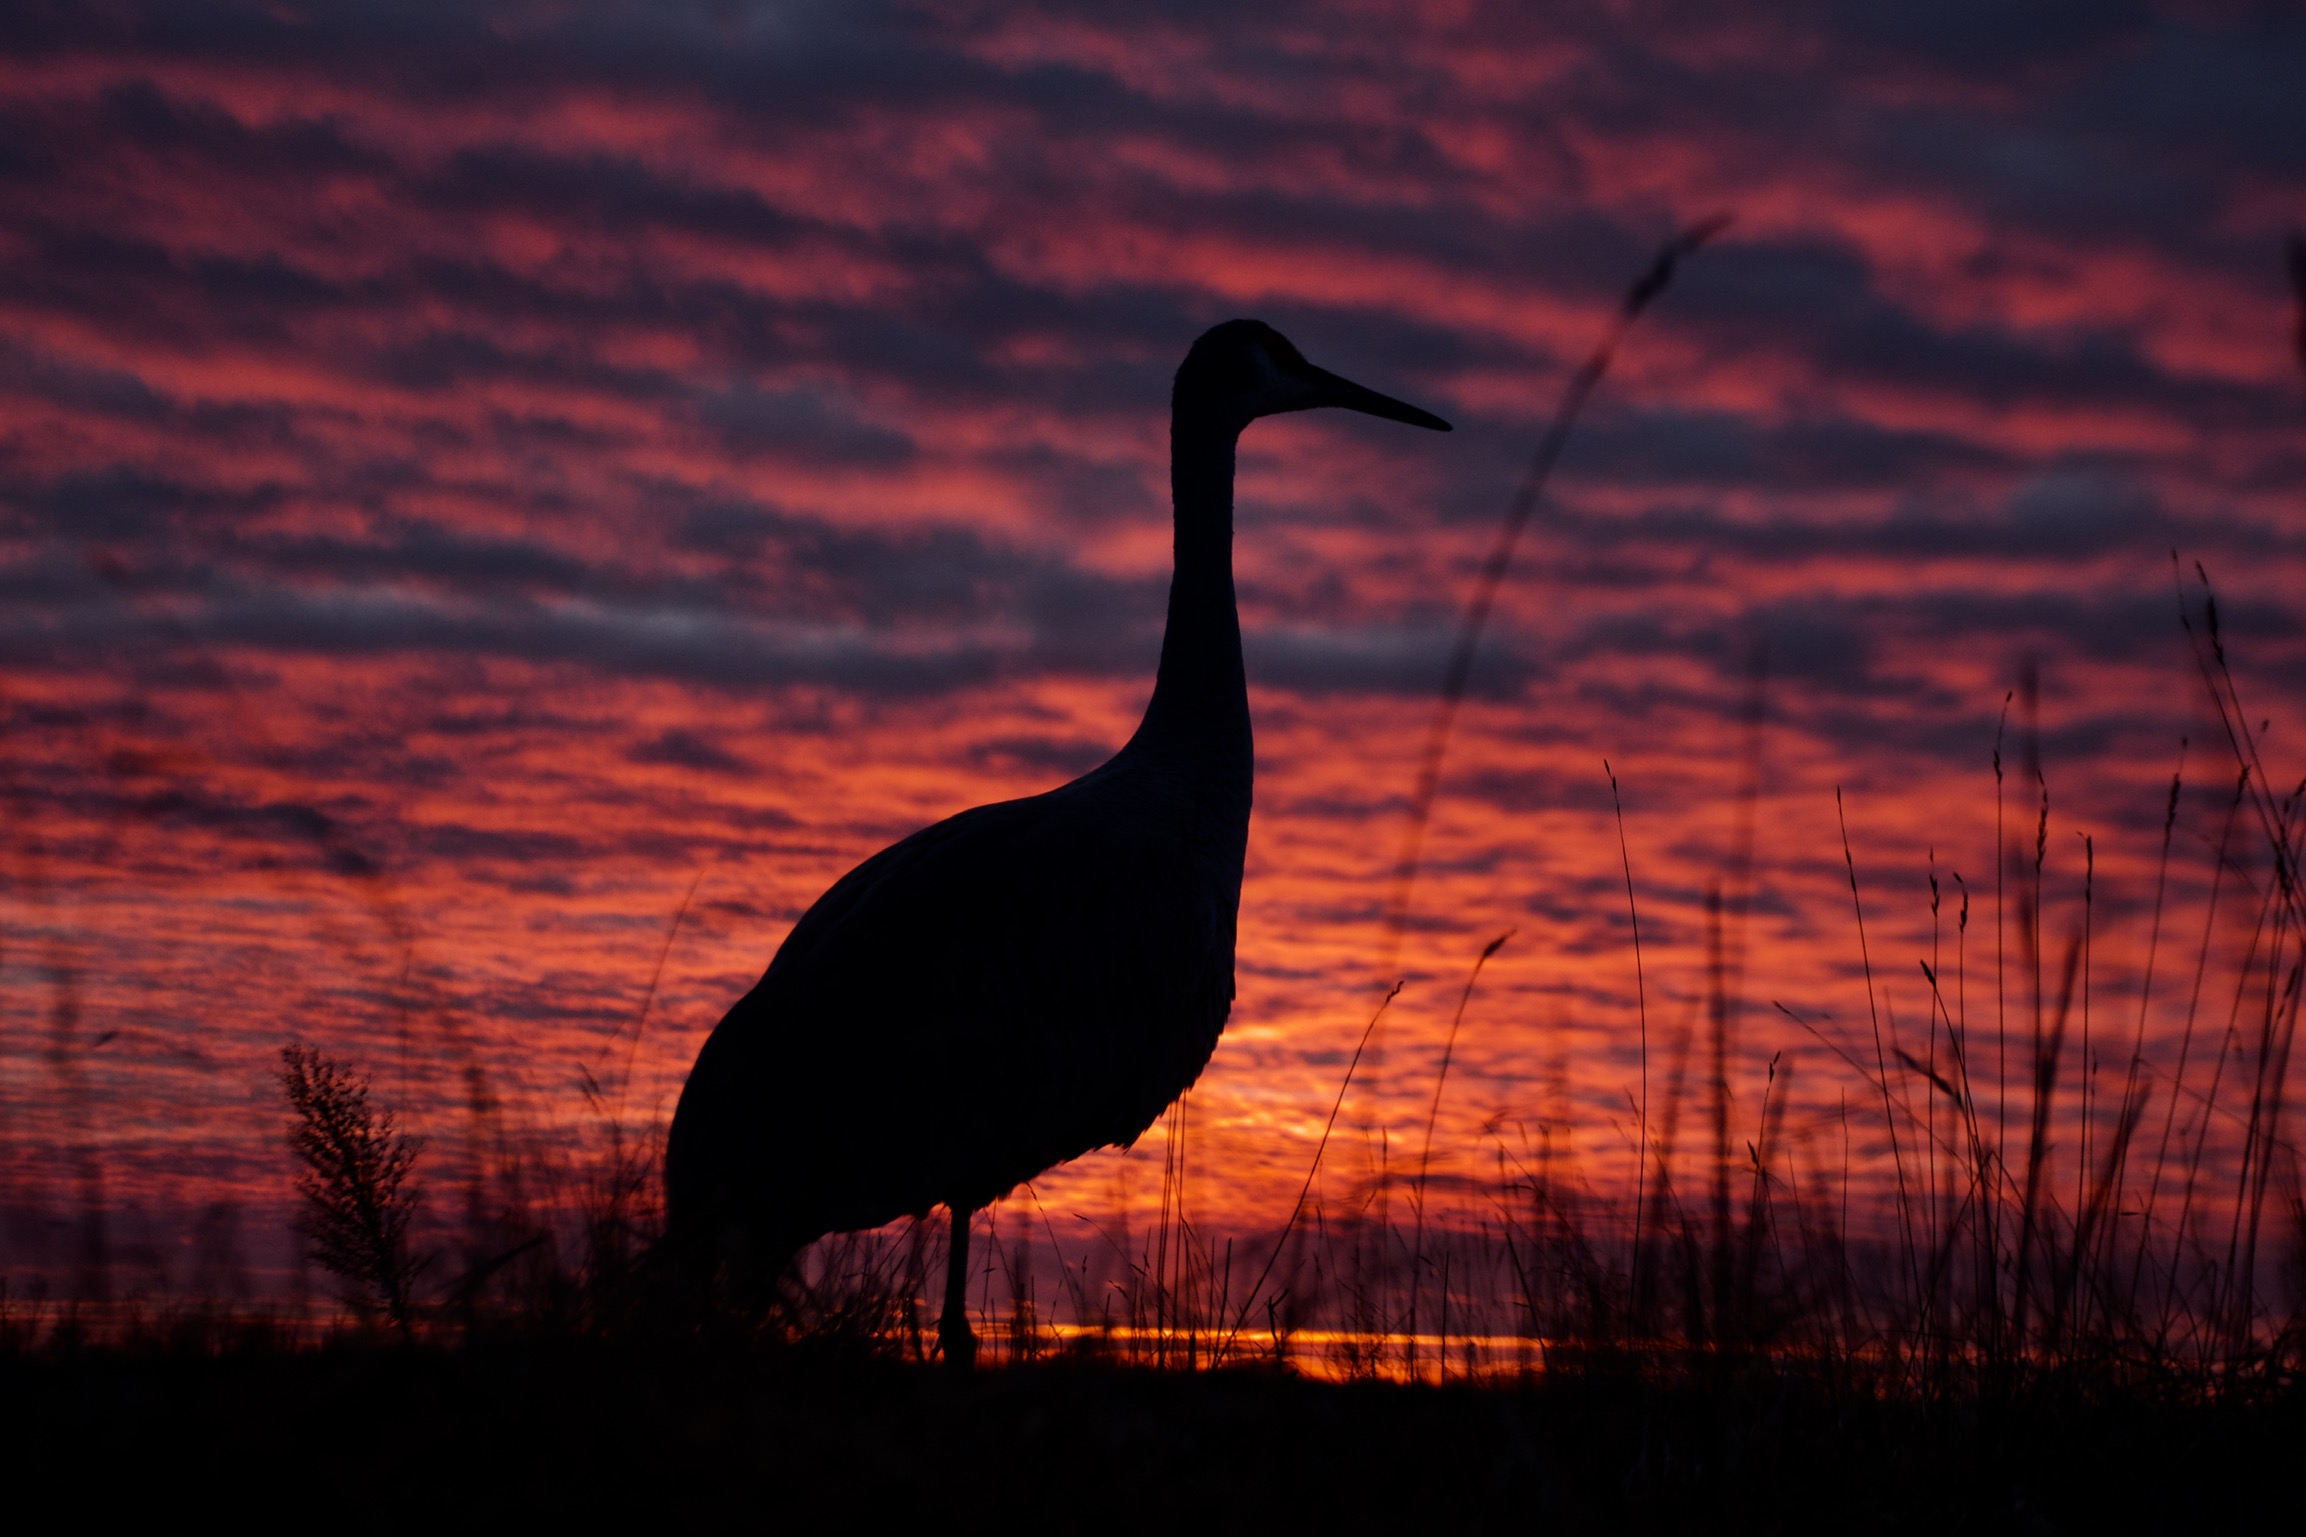 Silhouette of a Sandhill Crane with a sunset in the background